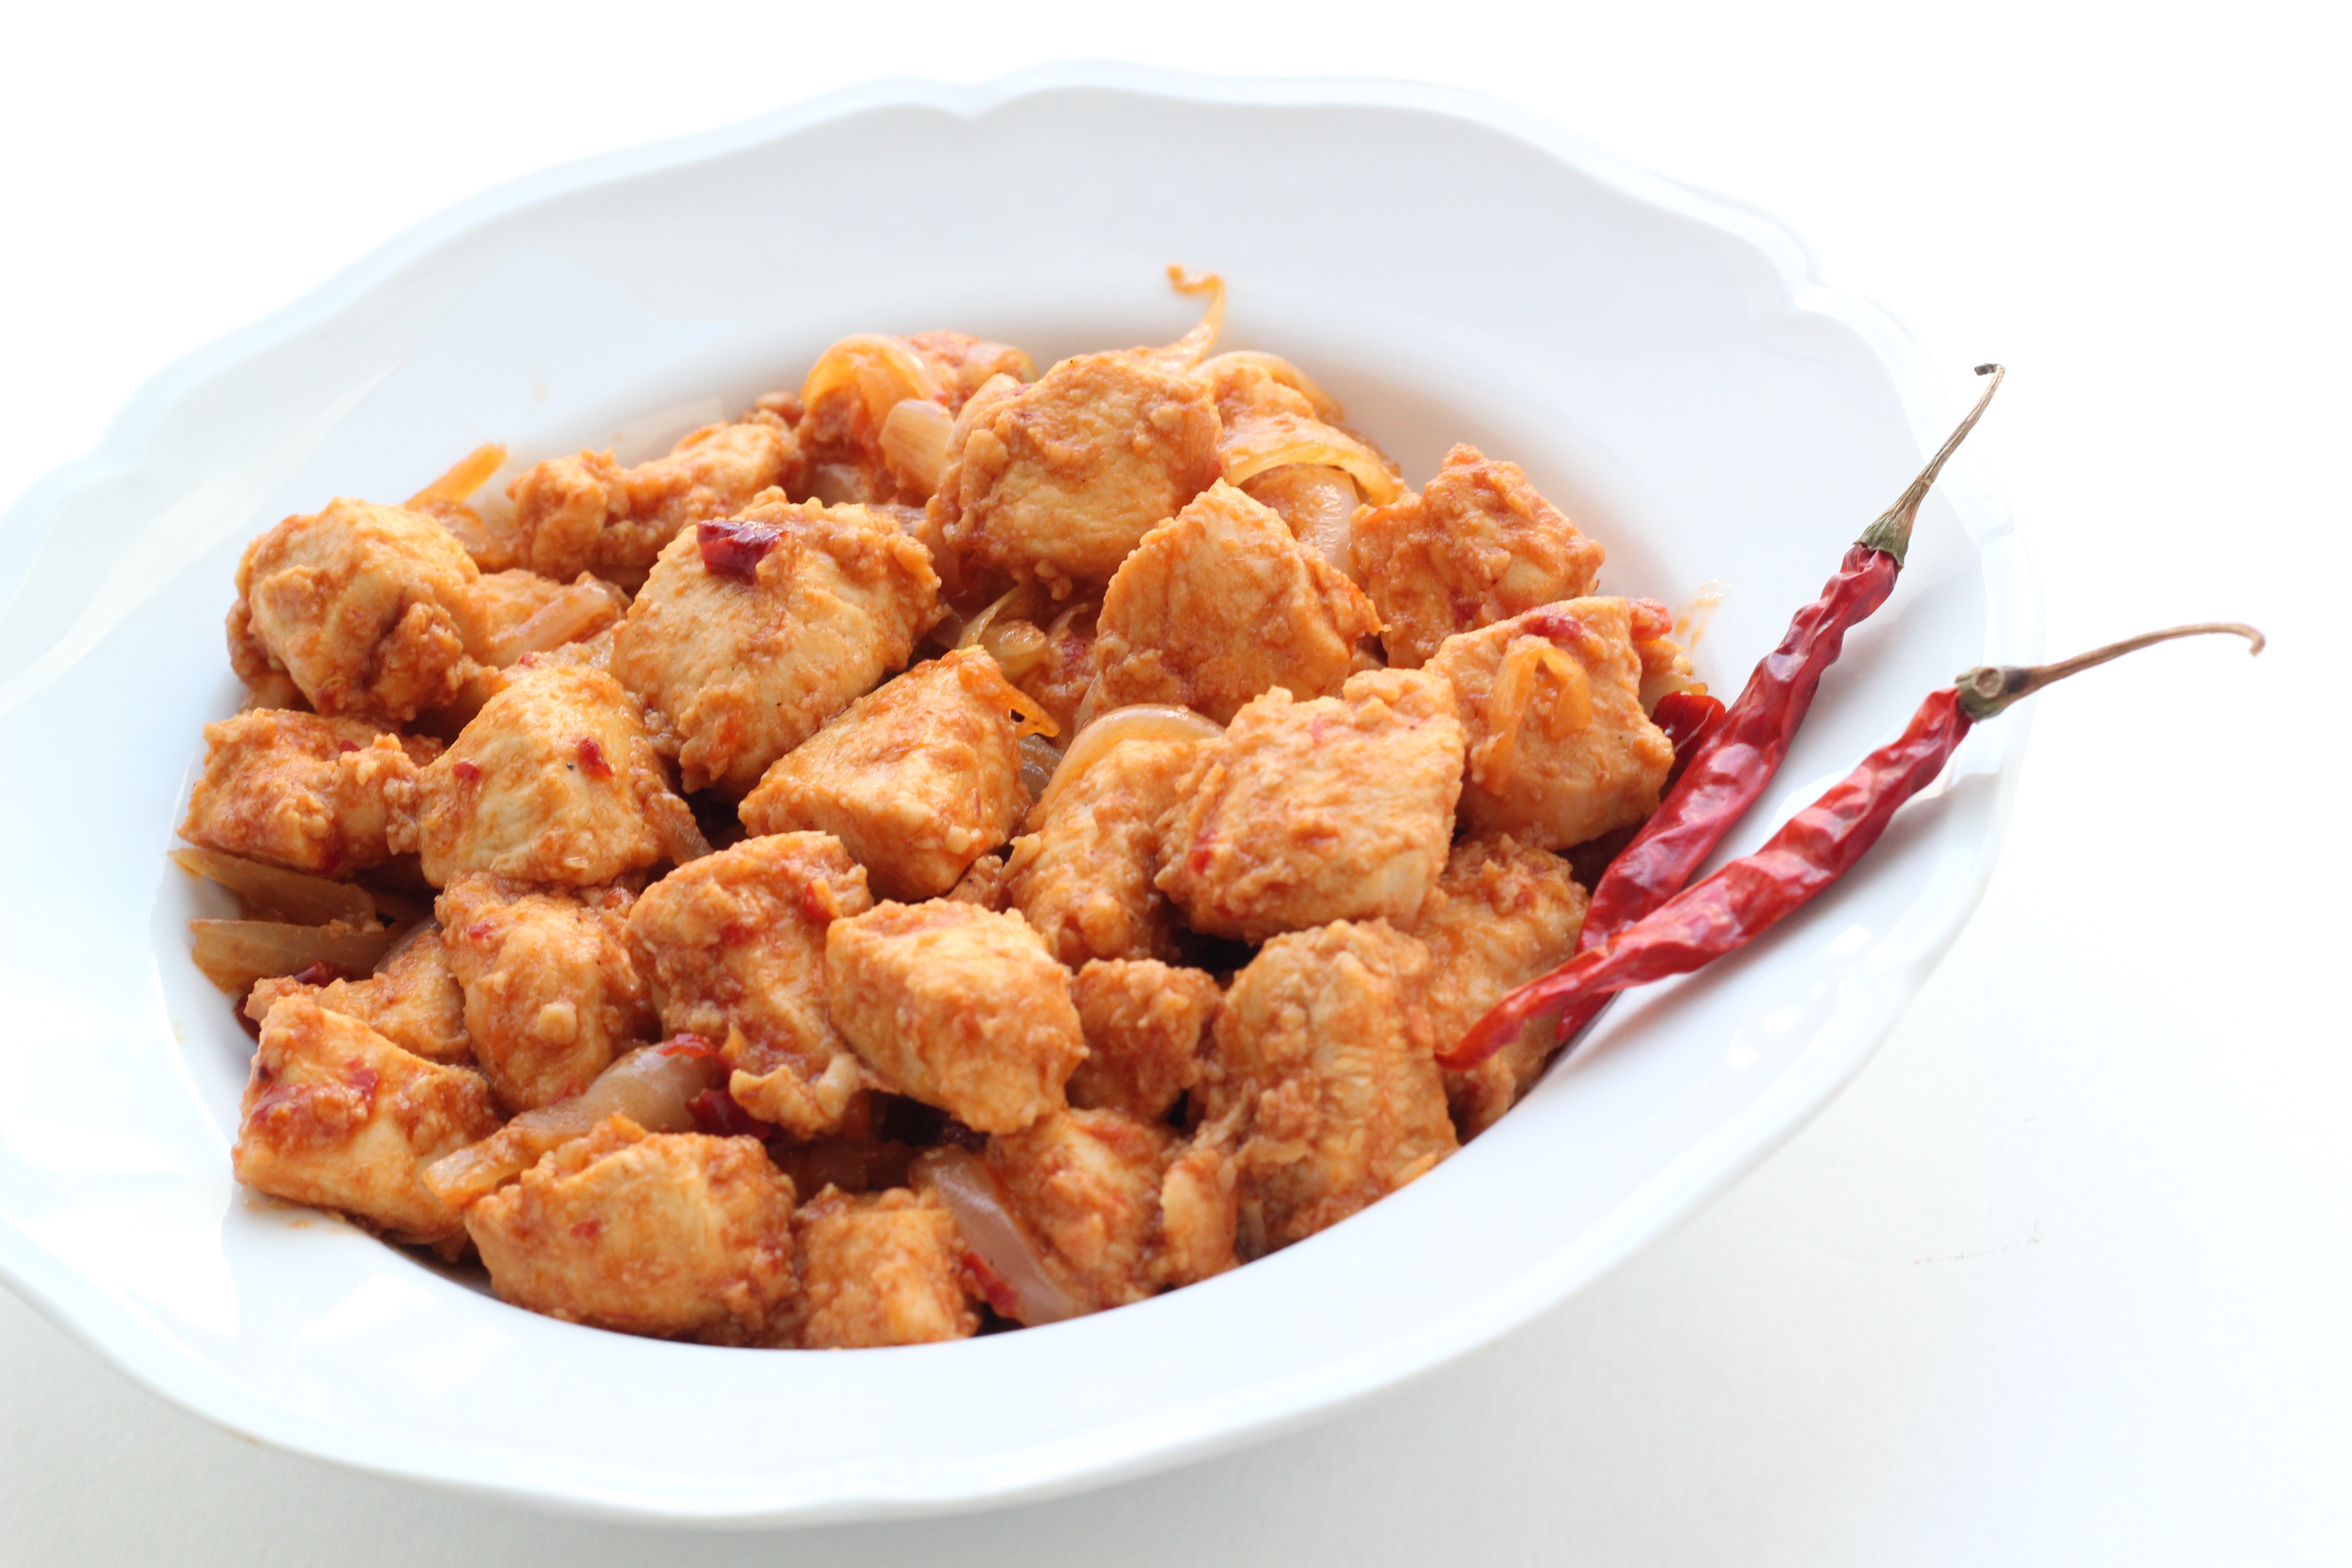 Indochinese Chili Chicken – From Paleo Planet